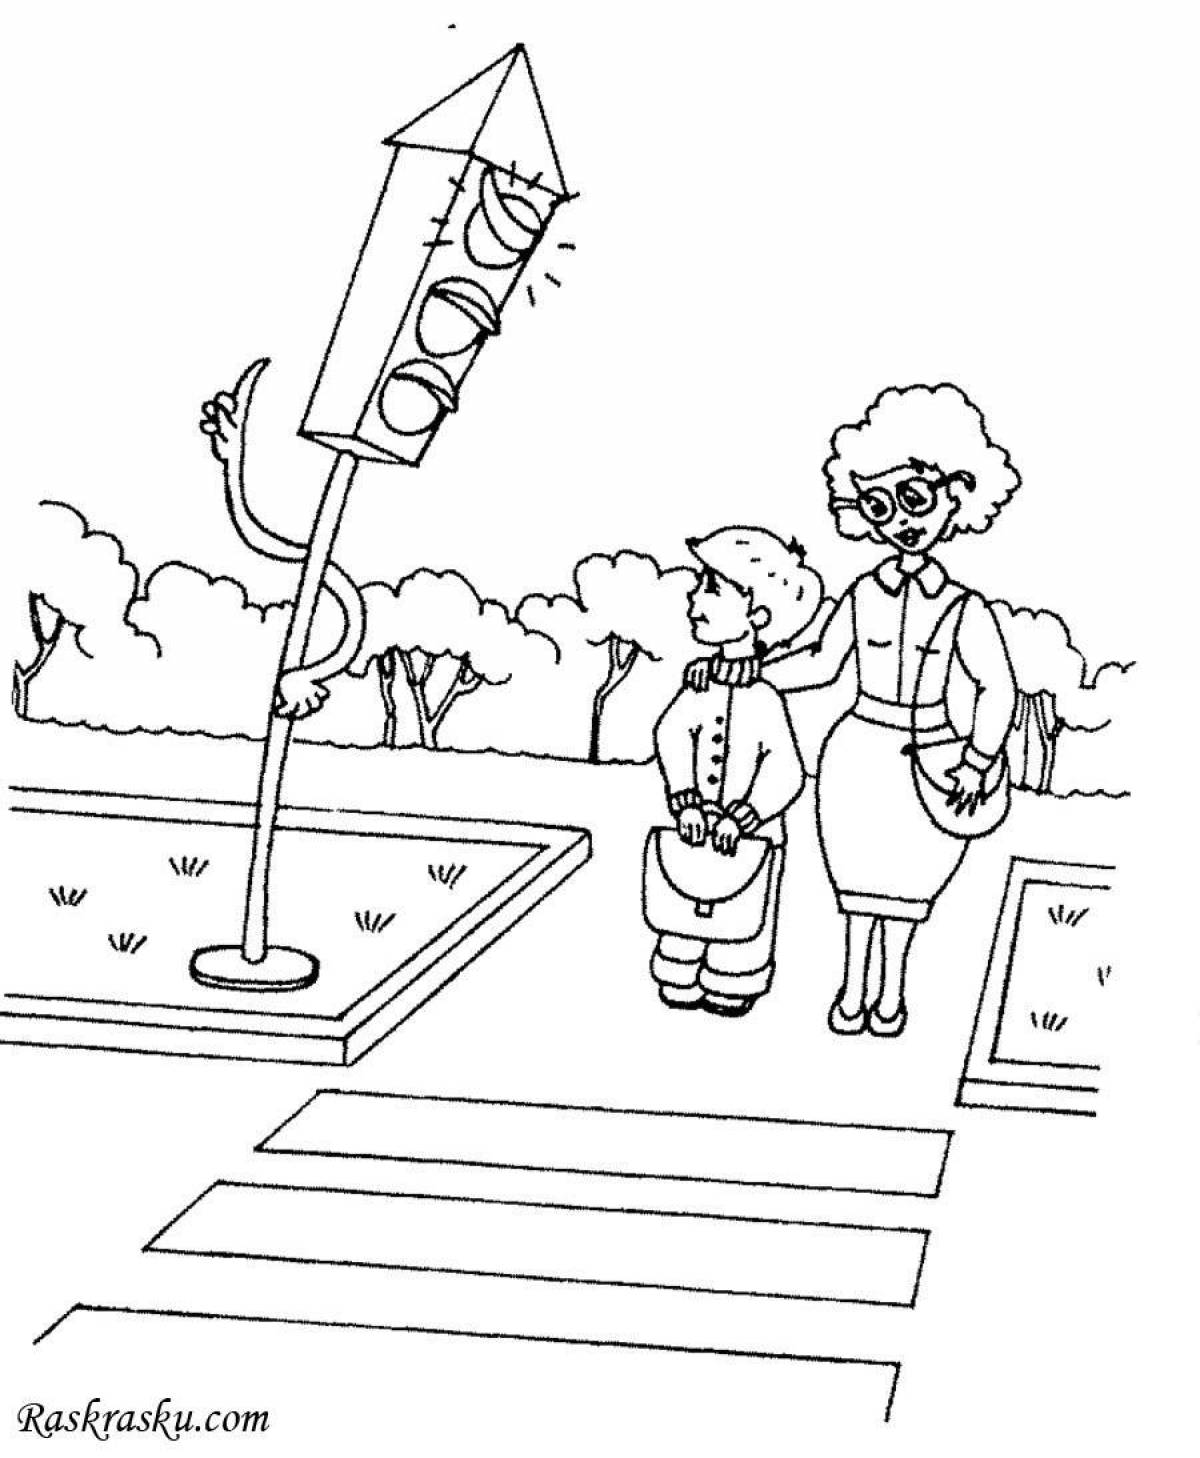 Coloring page attractive rules of the road